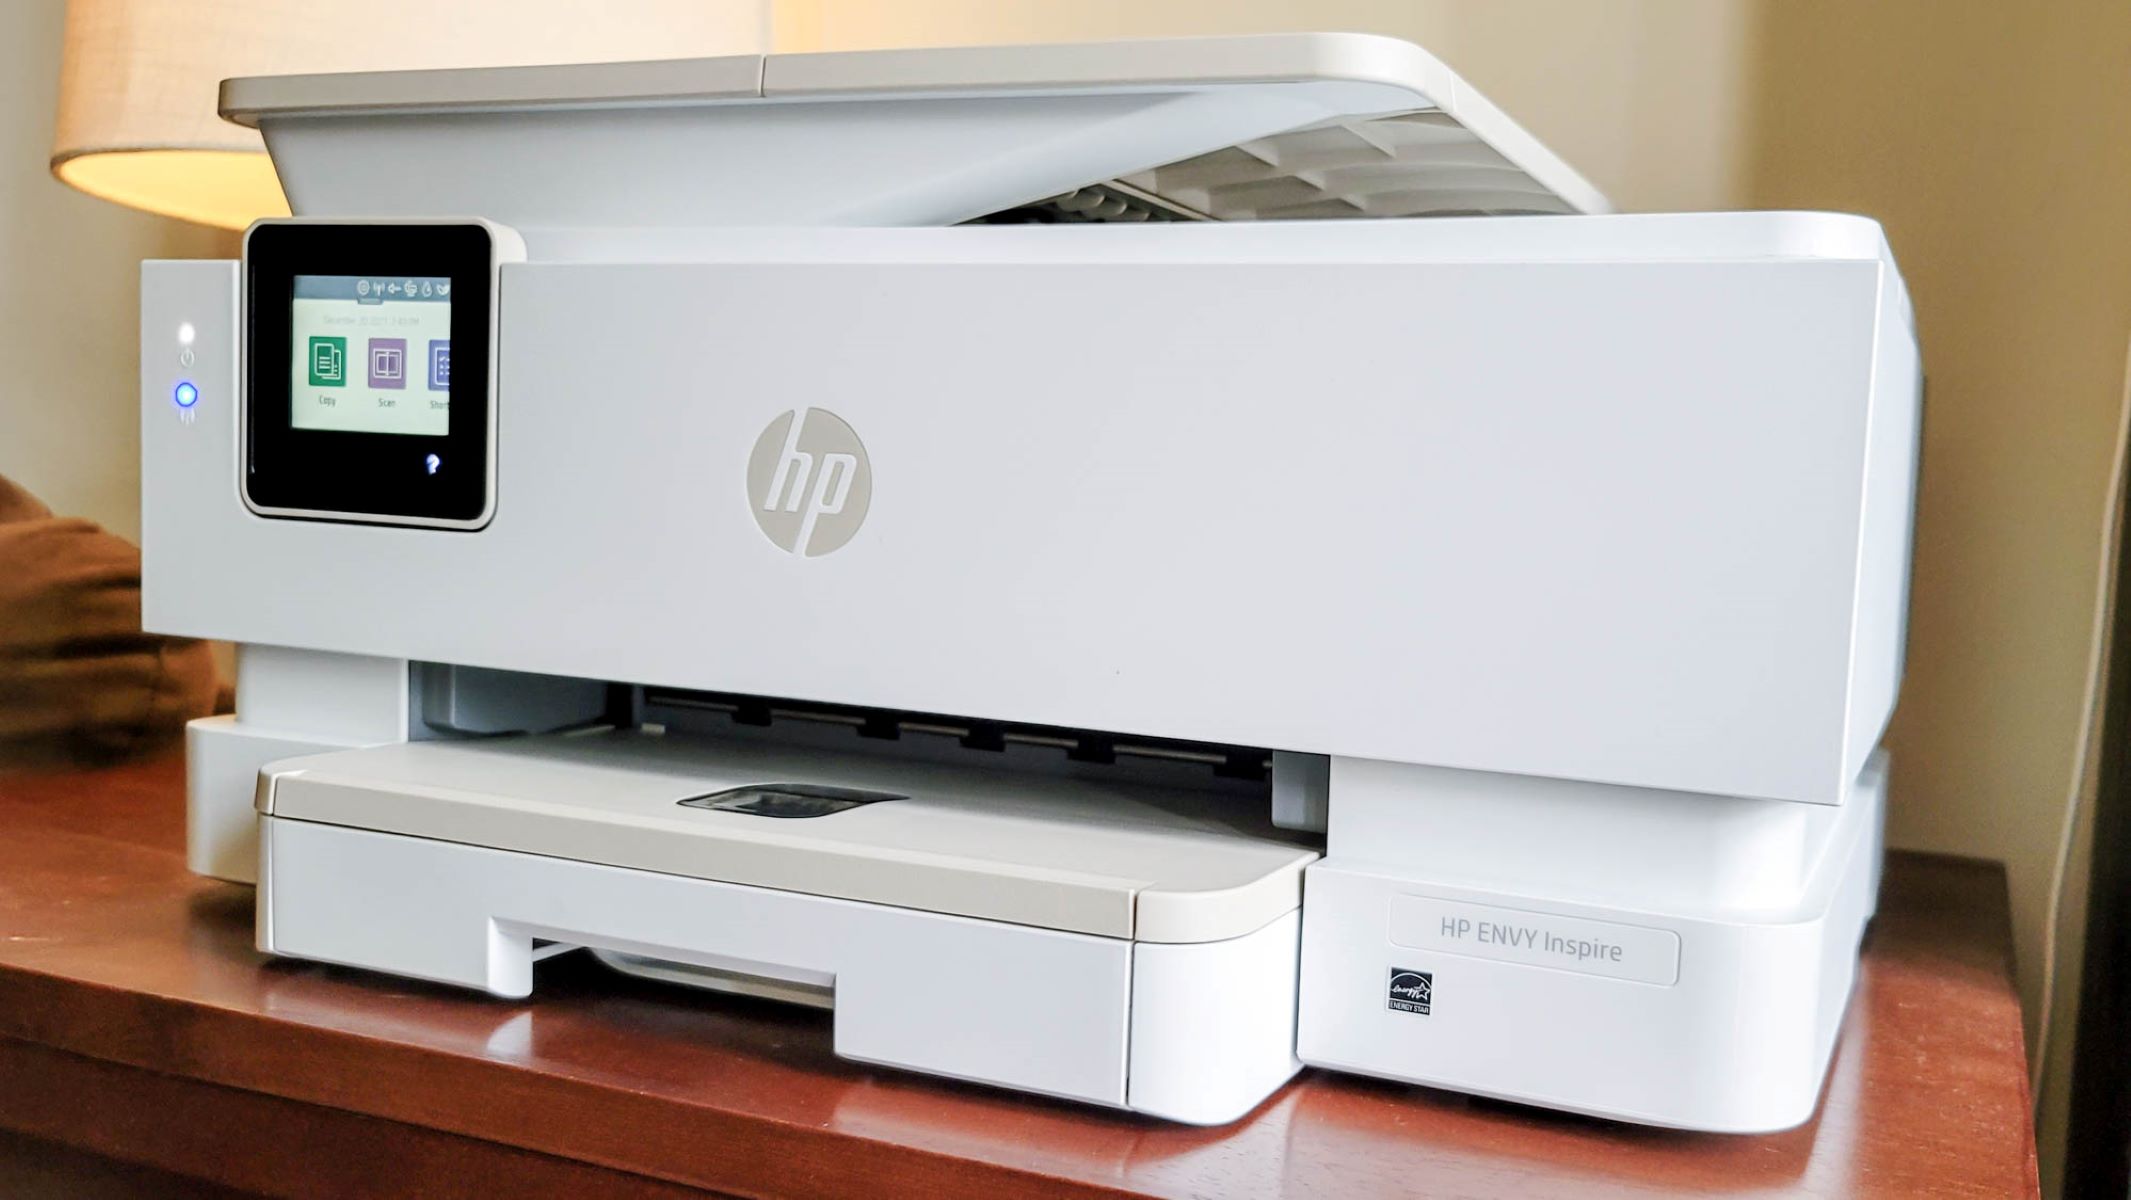 How To Connect To HP Printer Using Hotspot